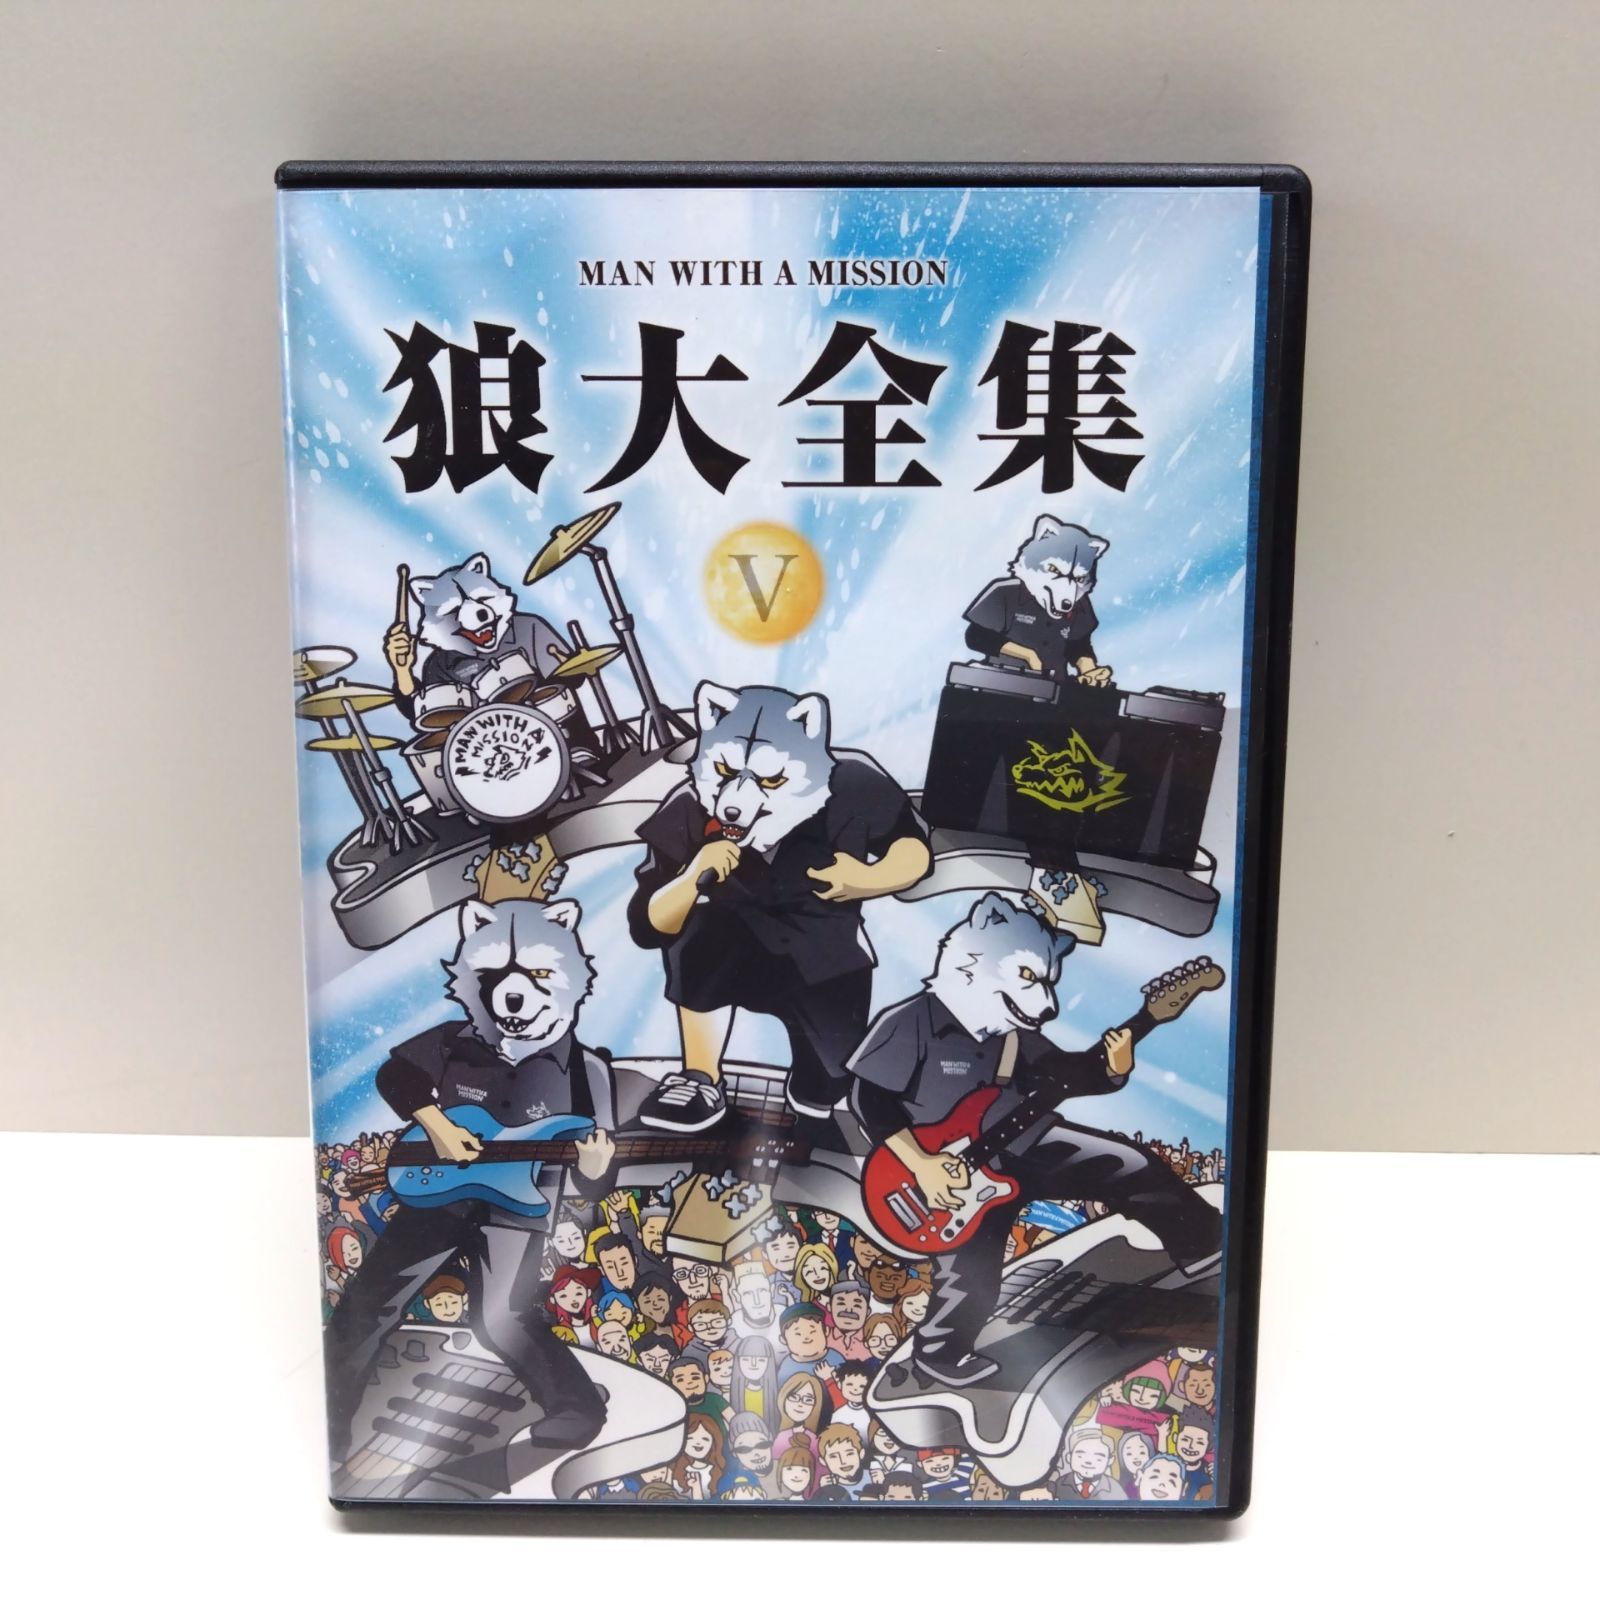 DVD MAN WITH A MISSION 狼大全集 全6枚セット 初回限定盤 - DVD 